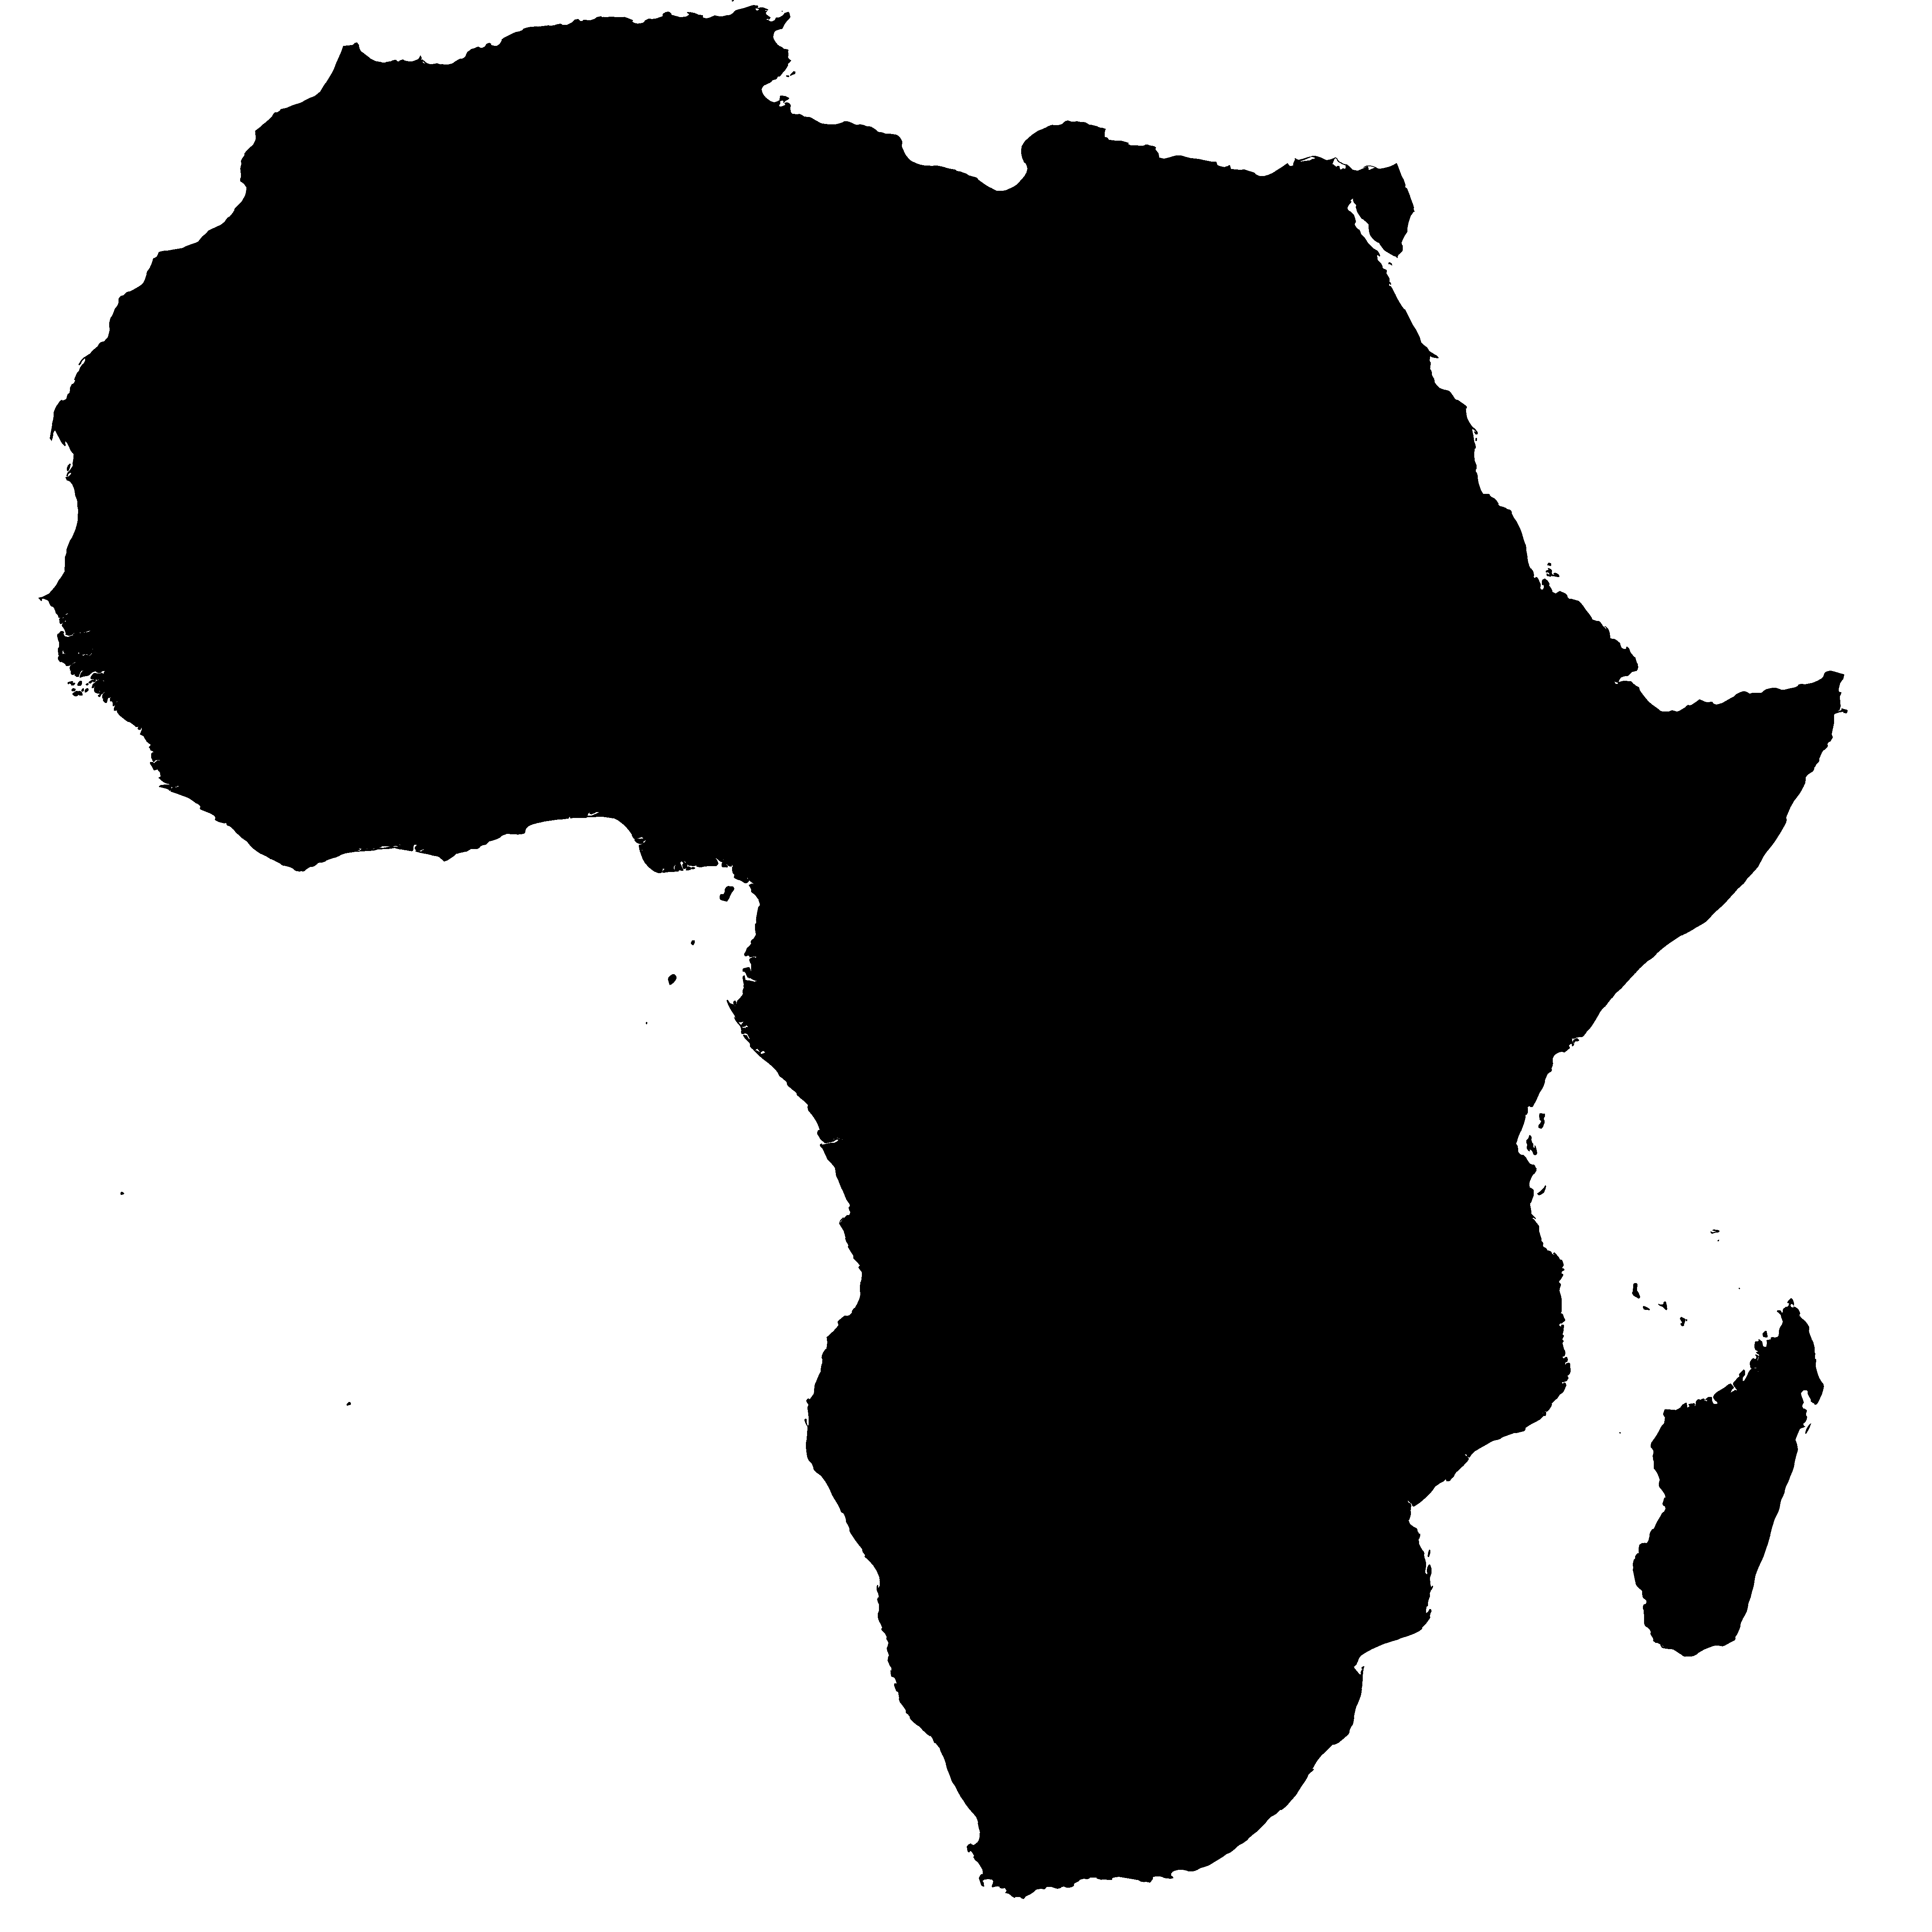 Twitter logo on top of outline of Africa with color gradient